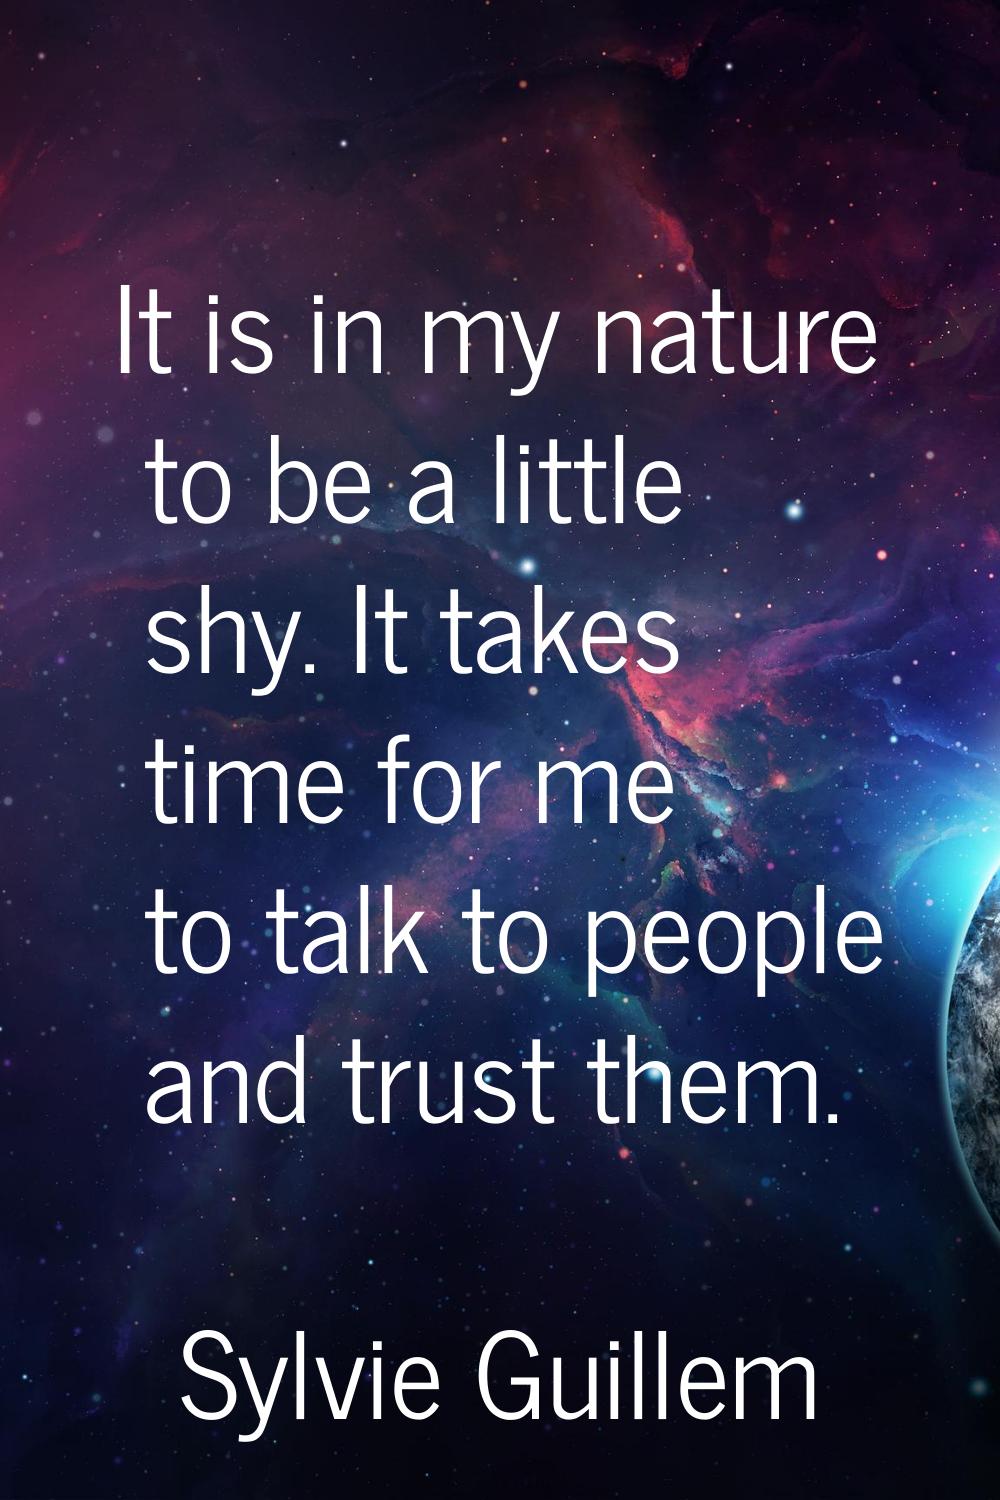 It is in my nature to be a little shy. It takes time for me to talk to people and trust them.